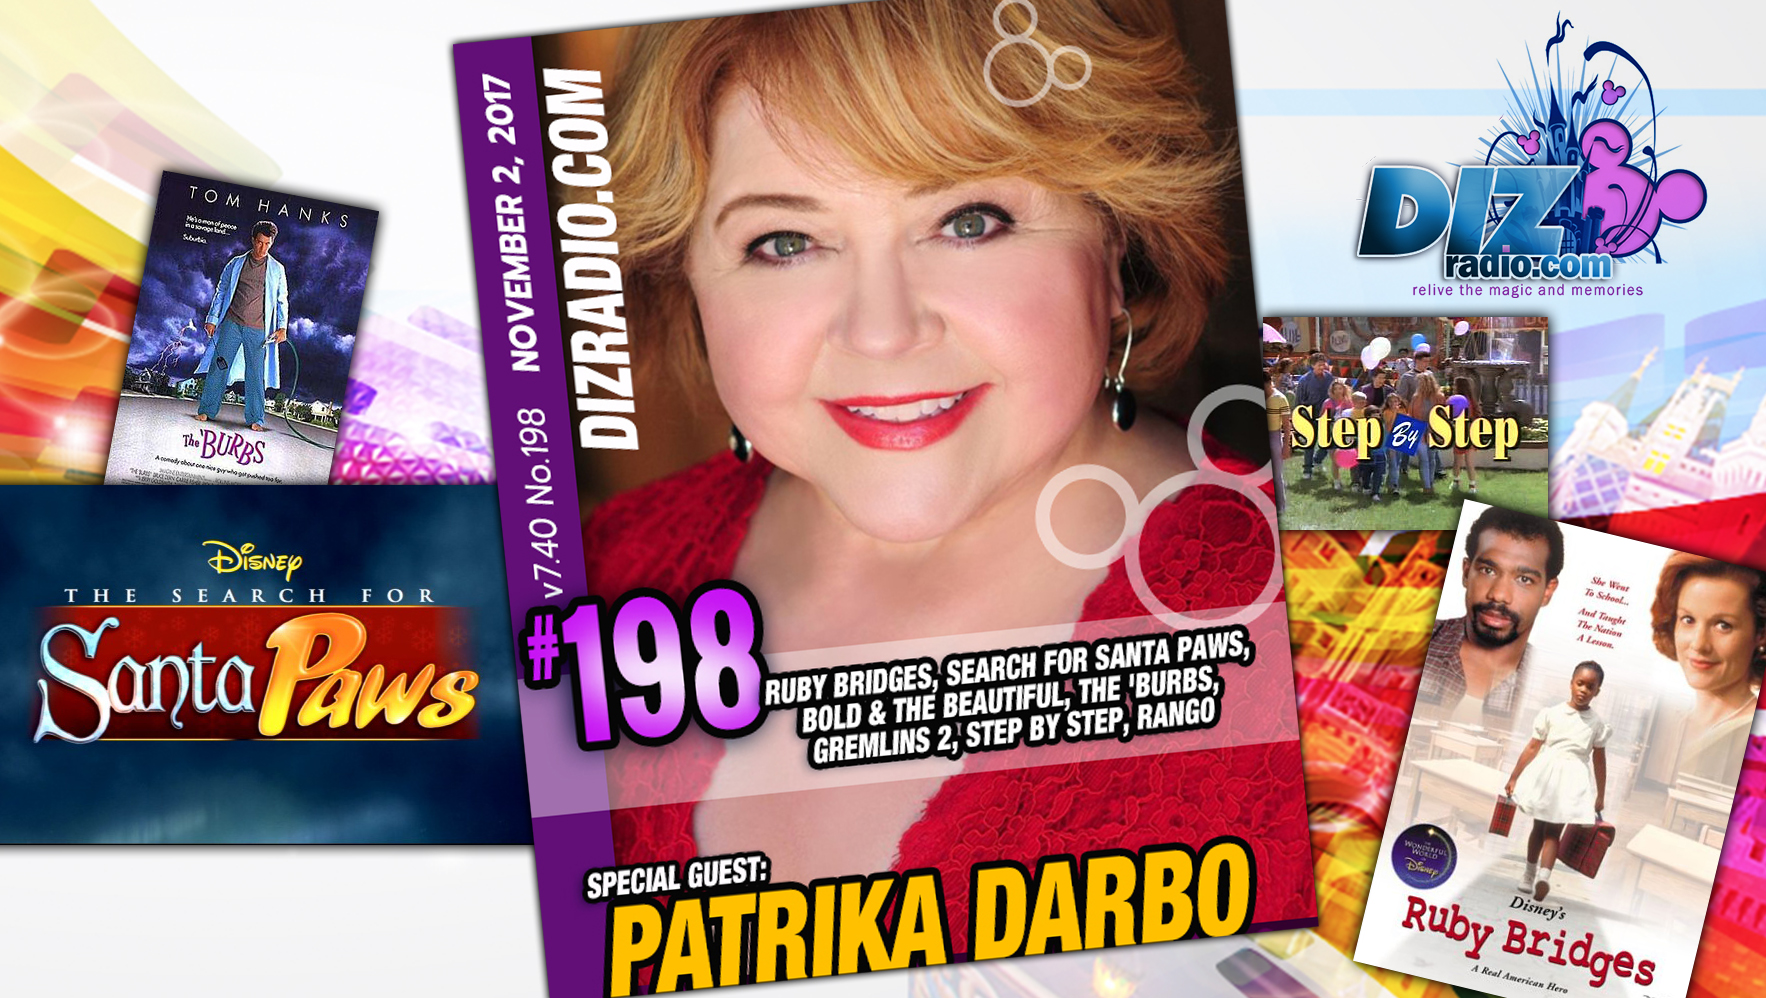 DisneyBlu's DizRadio Disney on Demand Podcast Show #198 w/ Guest PATRIKA DARBO (Disney's Ruby Bridges, Step By Step, The Search for Santa Paws, The Burbs, Bold and the Beautiful, Spaced Invaders, Gremlins 2 and more)